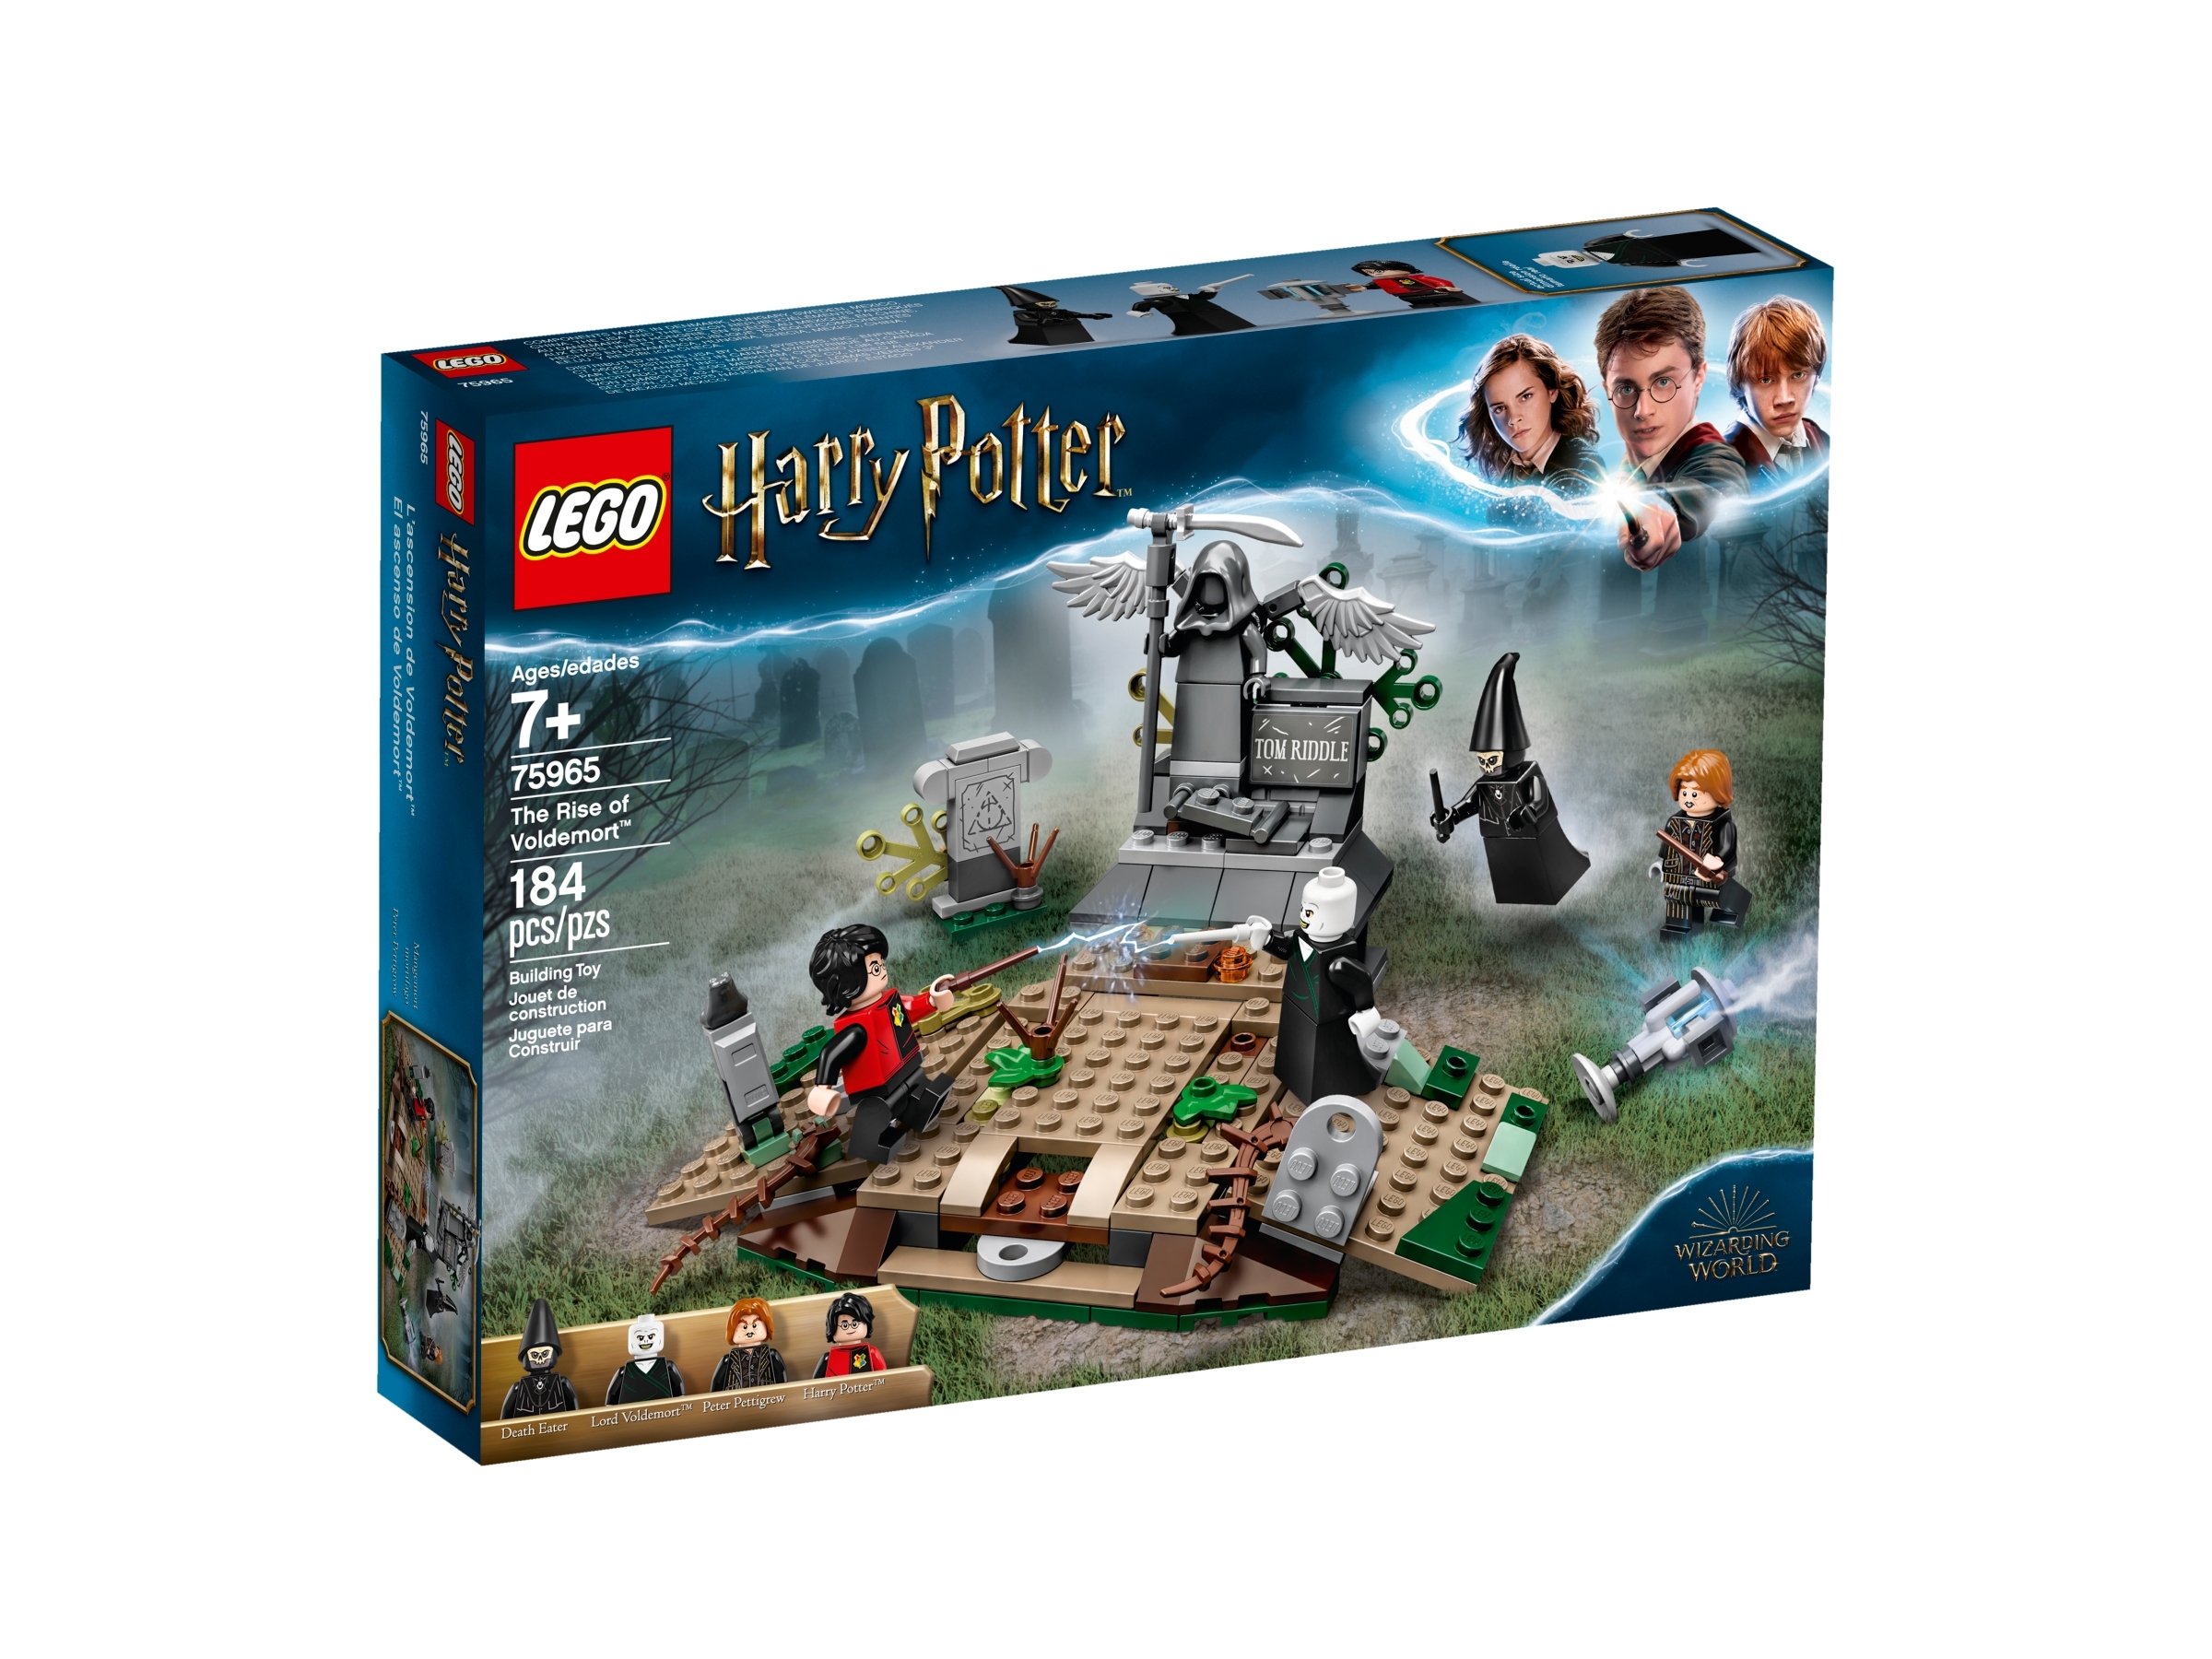 Lego Death Eater Minifigure from Harry Potter from 75965 